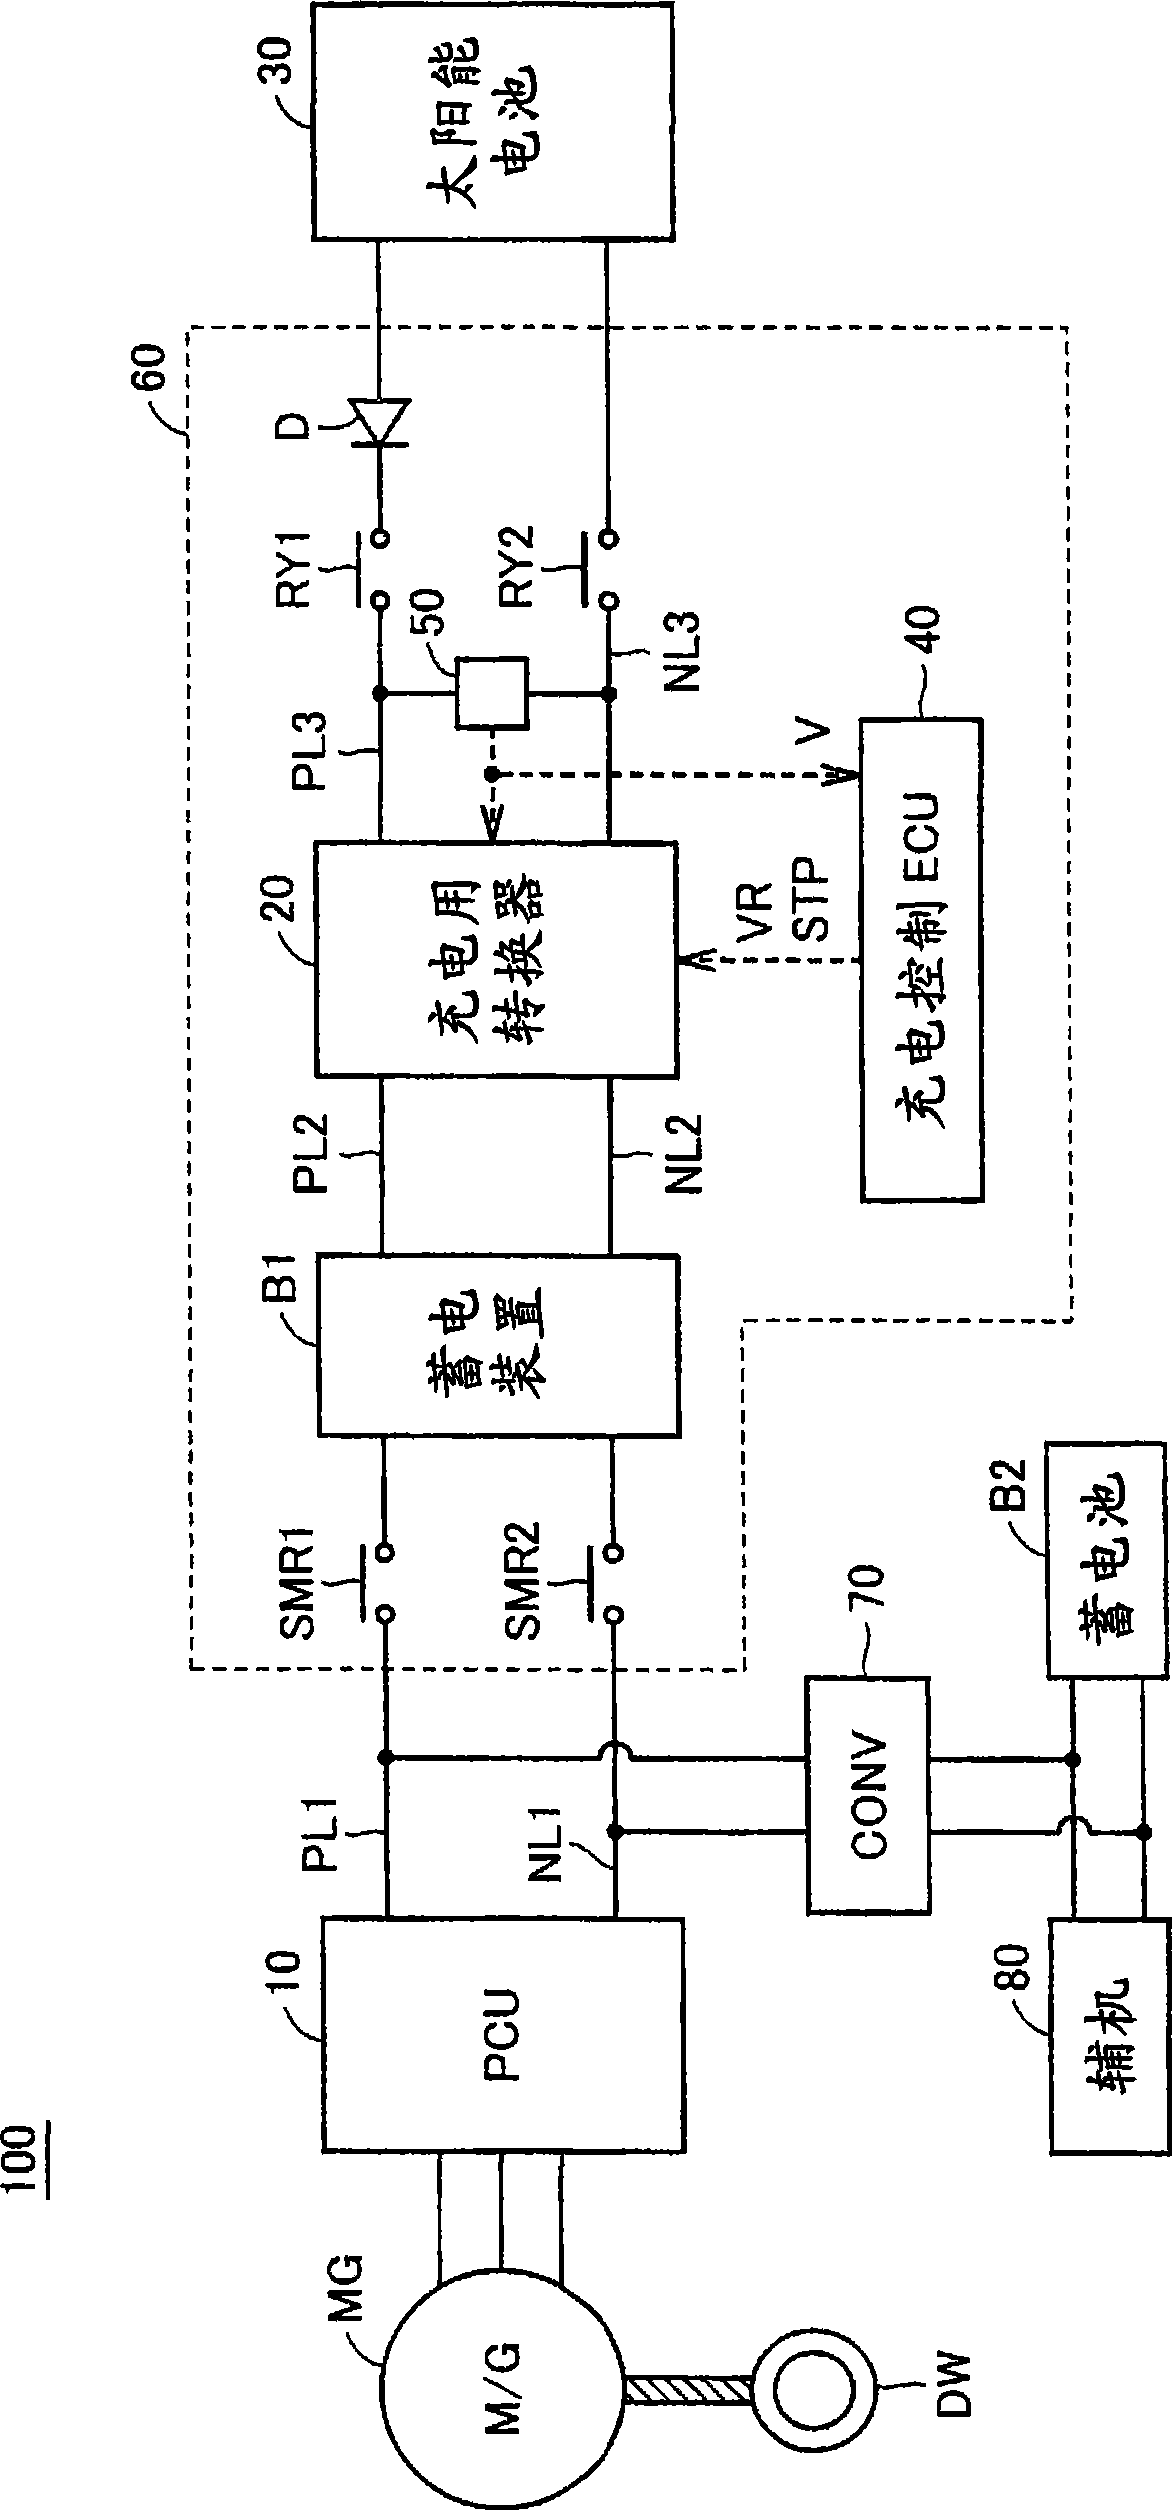 Solar photovoltaic power generation system, vehicle, solar photovoltaic power generation system control method, and computer readable recording medium having recorded therein program for causing compu